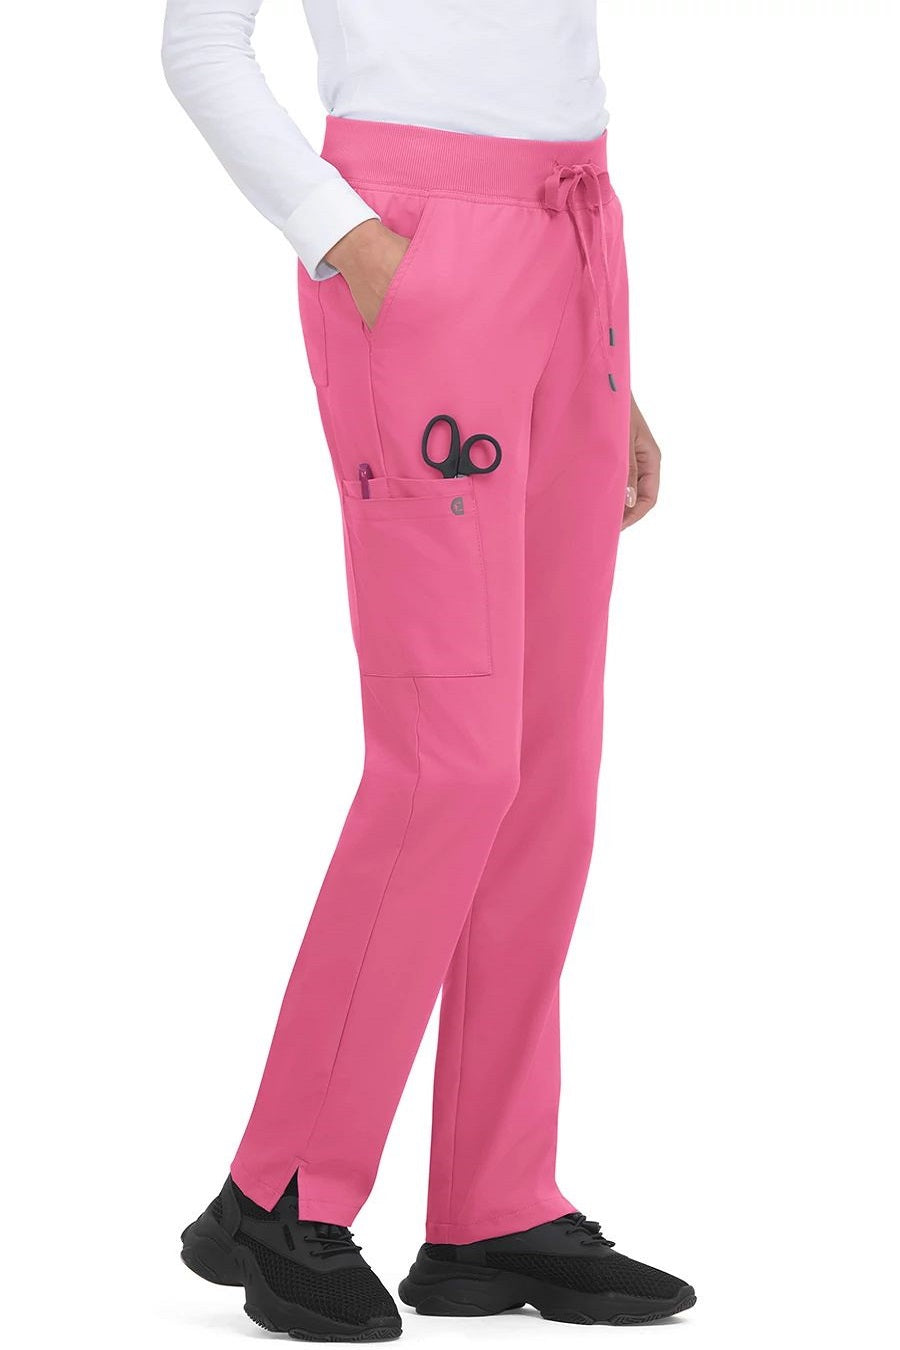 koi Scrub Pants Cureology Atria in Carnation at Parker's Clothing and Shoes.